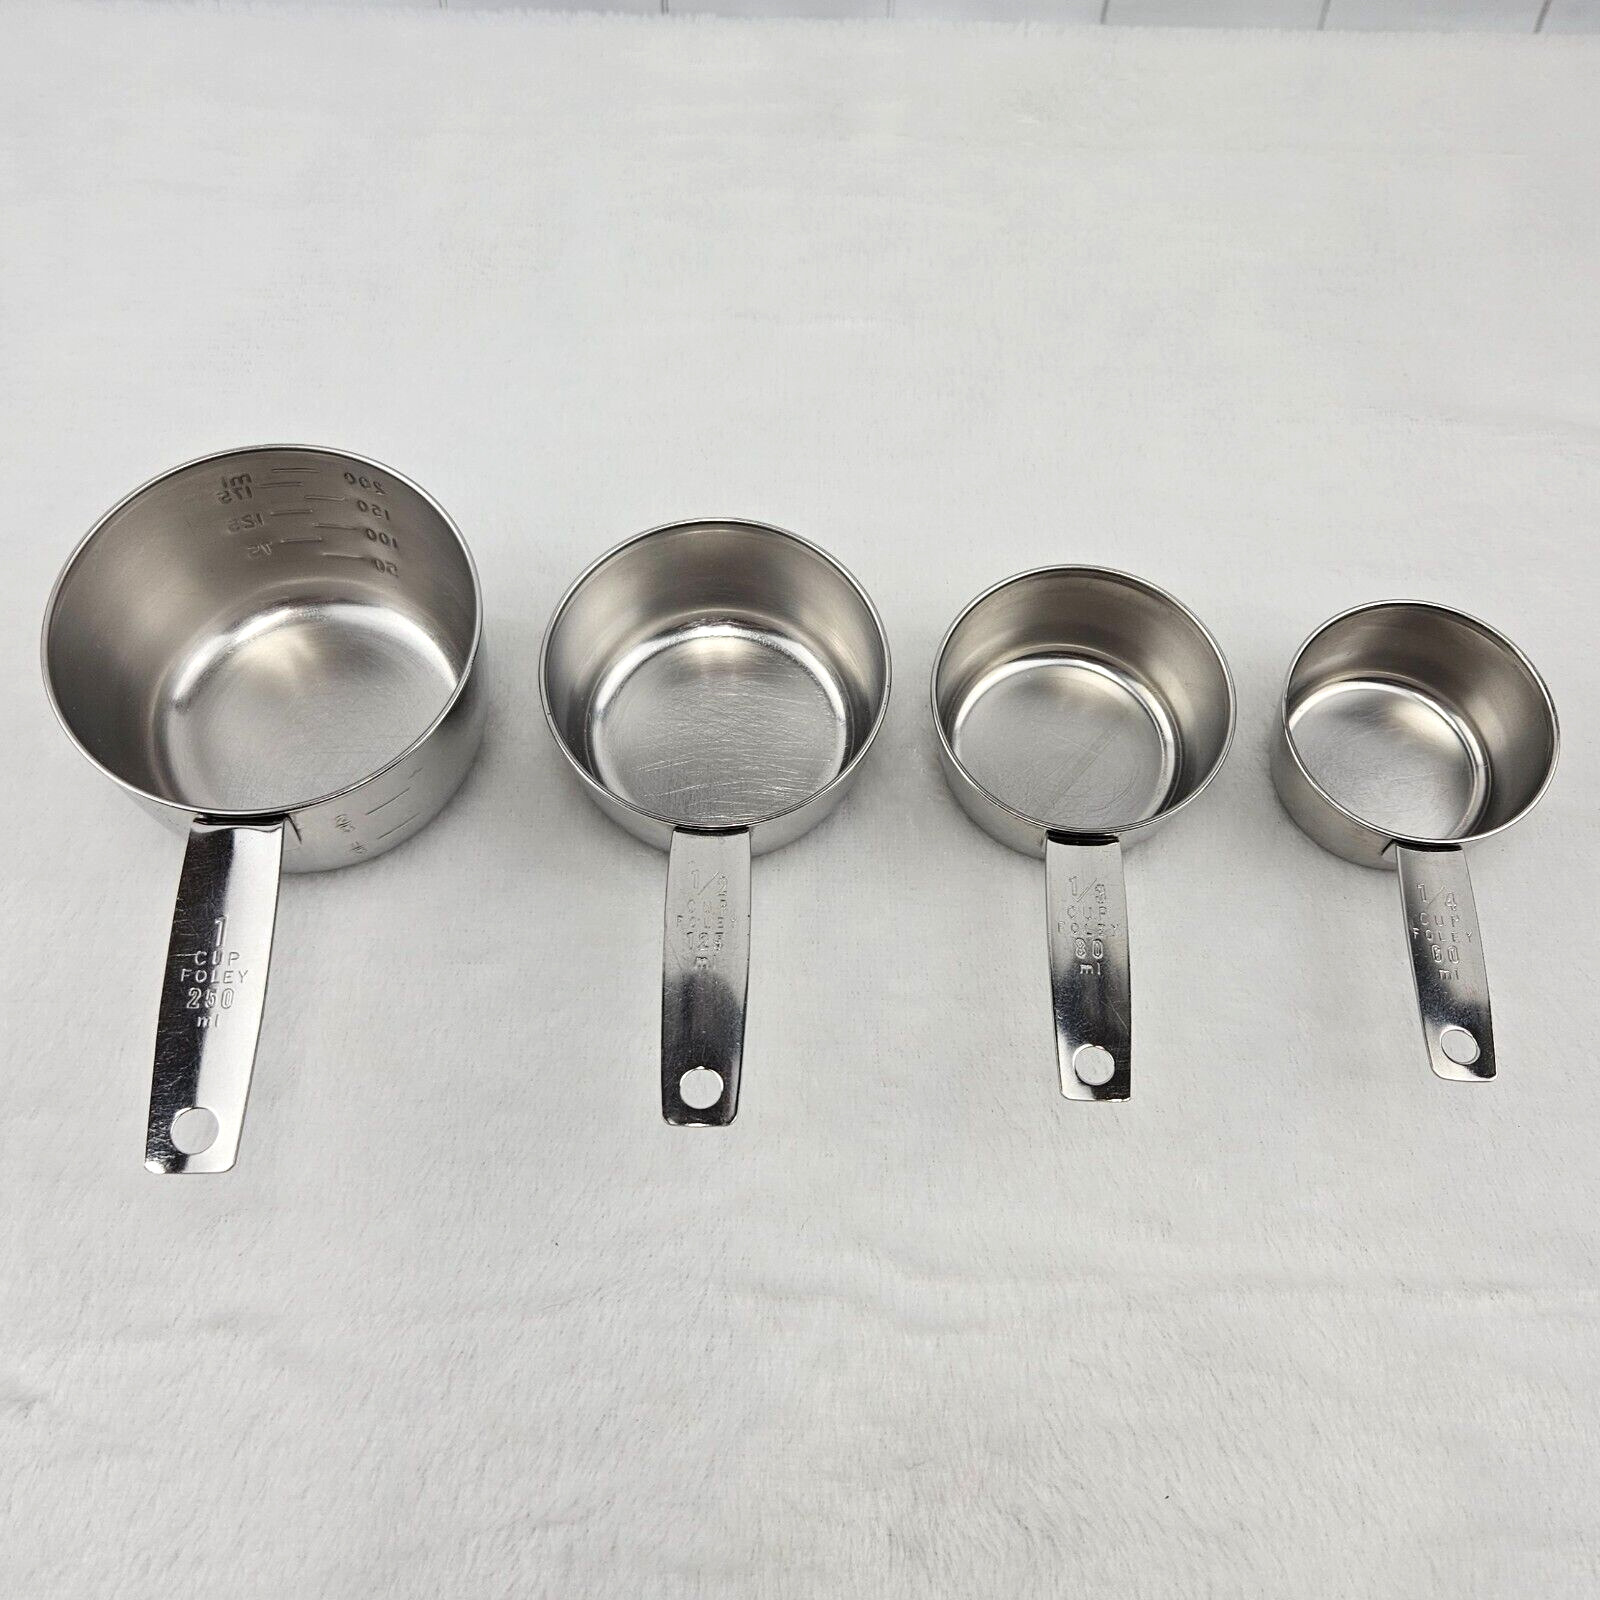 Set Of 4 Foley Measuring Cups Stainless Steel USA 1/4 1/3 1/2 1 Cup Vintage